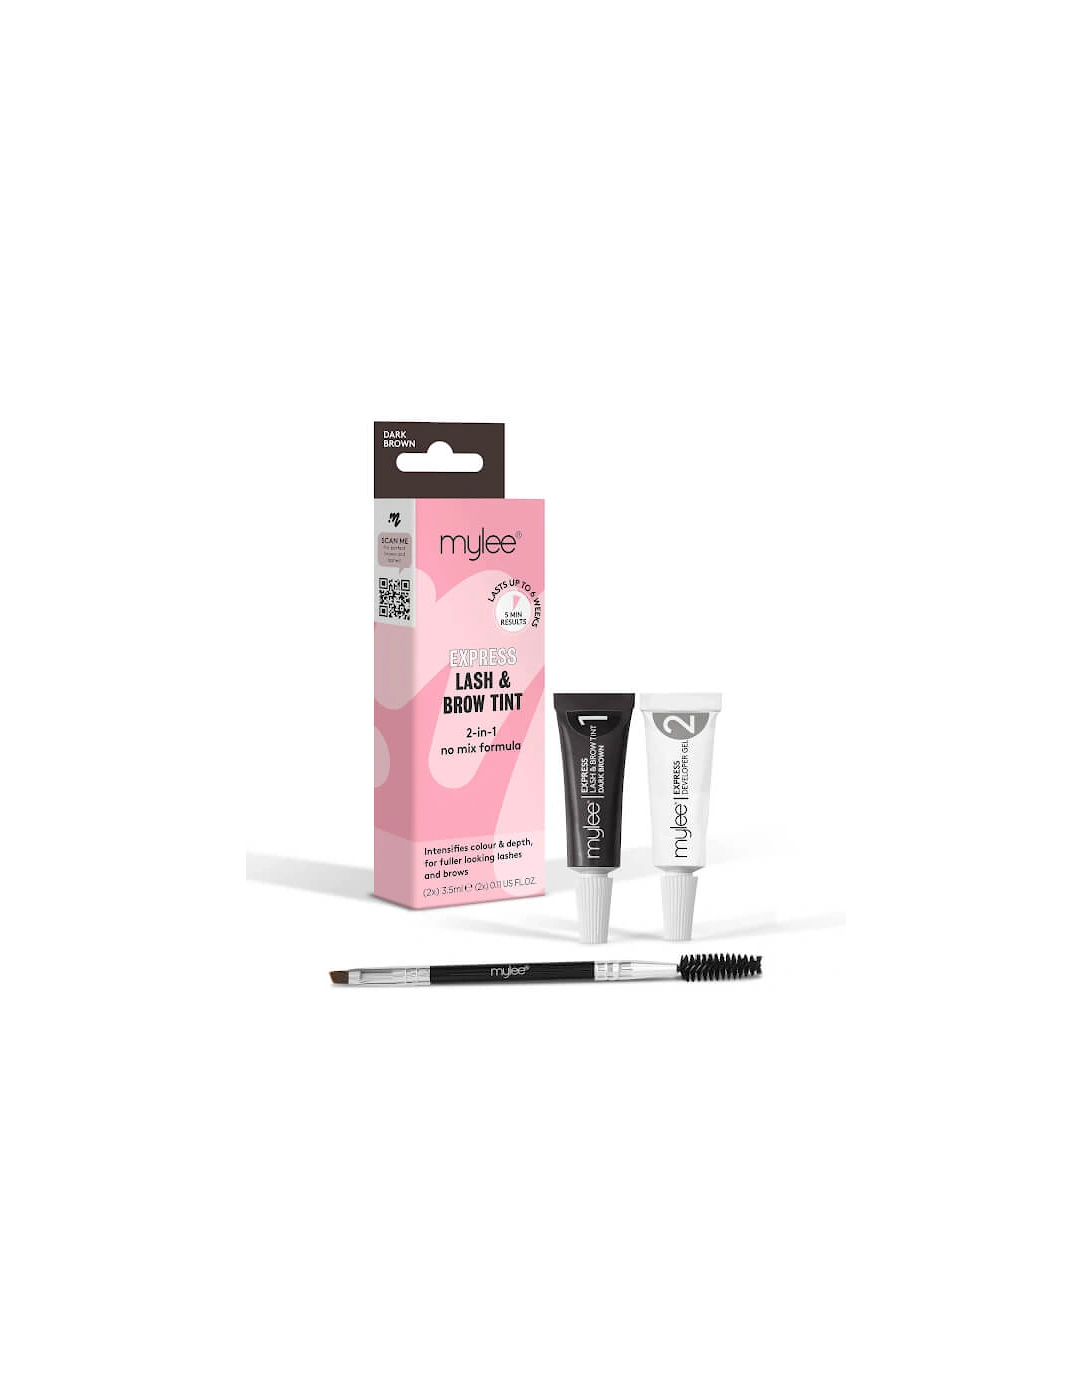 Express 2 in 1 Lash and Brow Tint - Dark Brown, 2 of 1